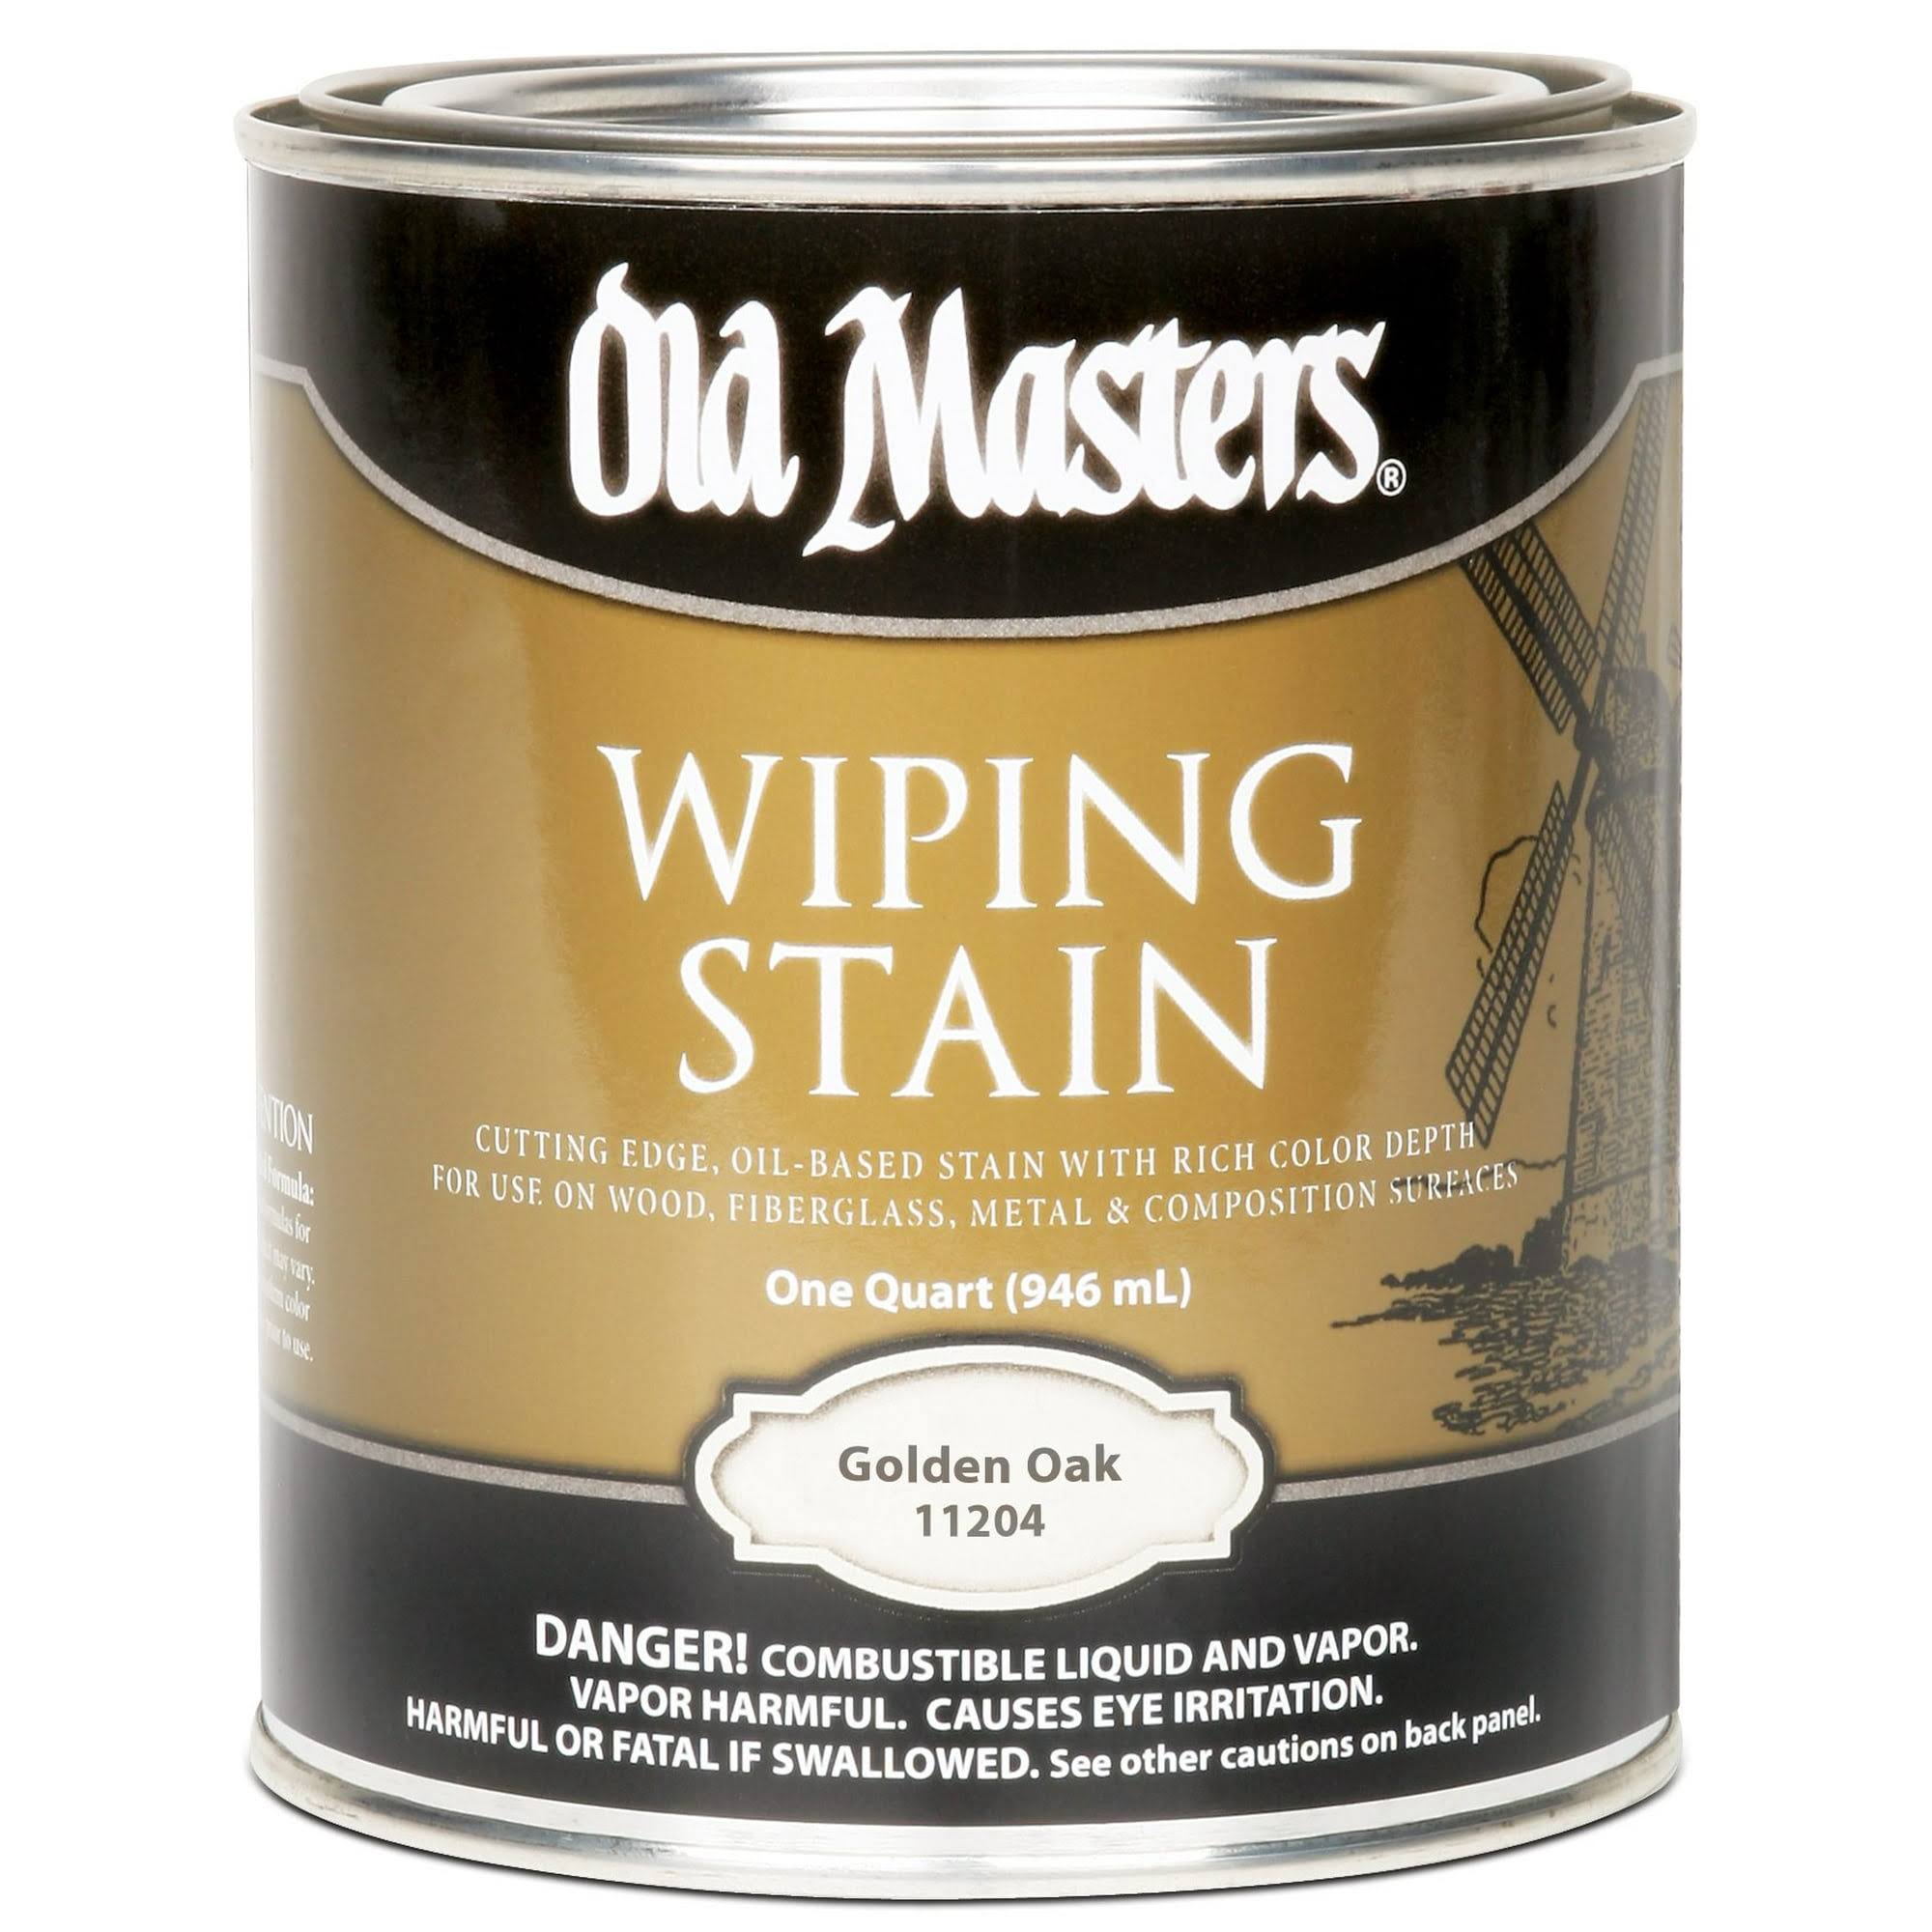 Old Masters 11204 Wipping Stain - Golden Oak, 1qt